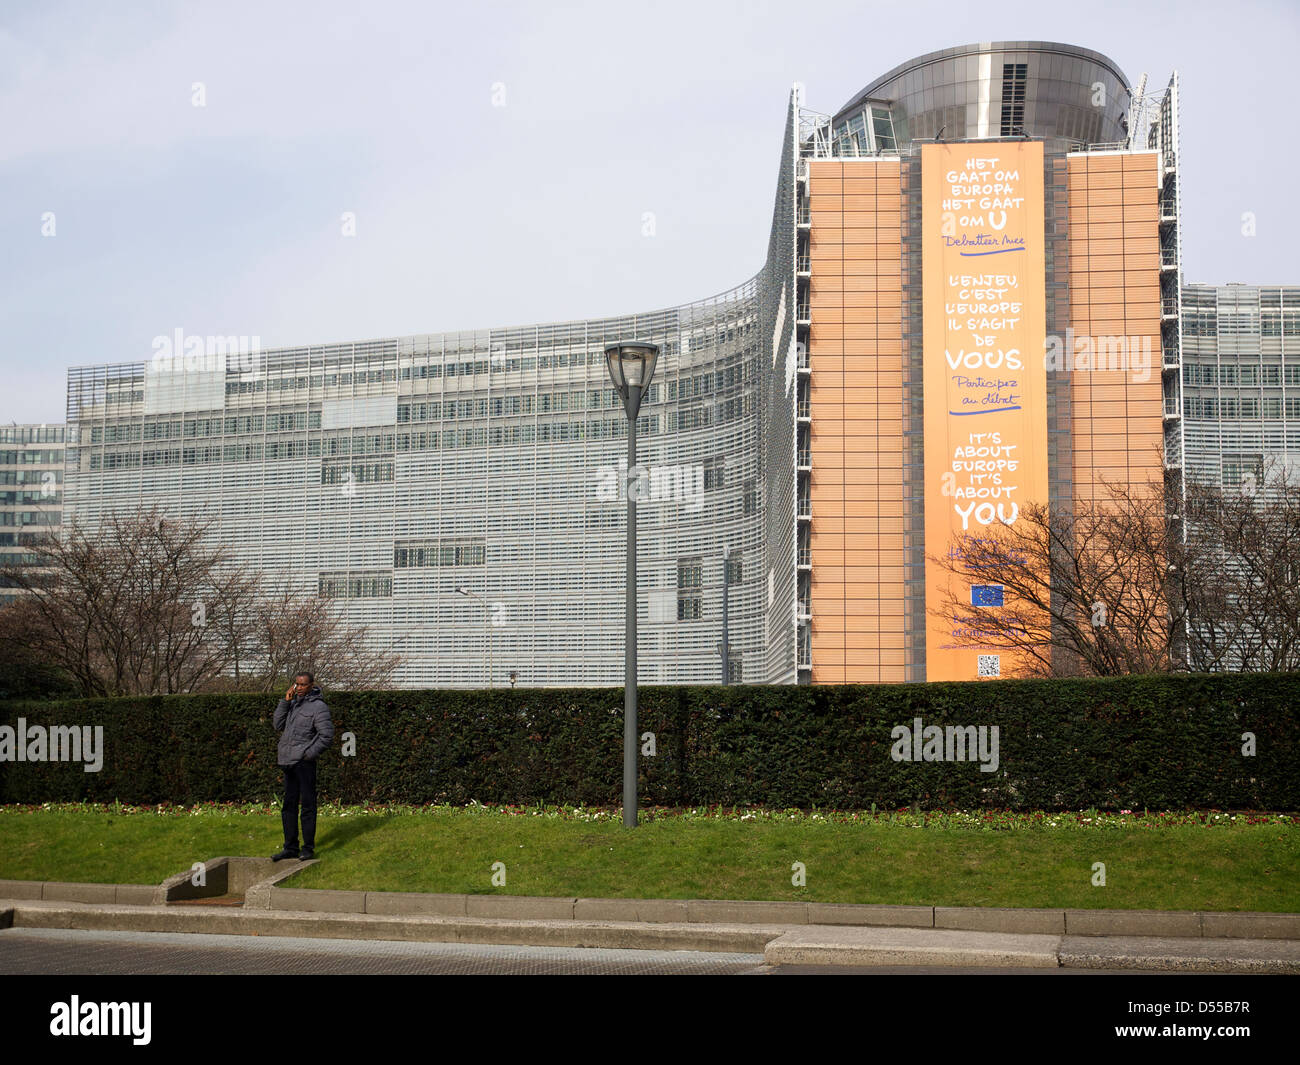 Man using cellphone at Schuman roundabout with the Berlaymont European Commission building in the background. Brussels, Belgium Stock Photo